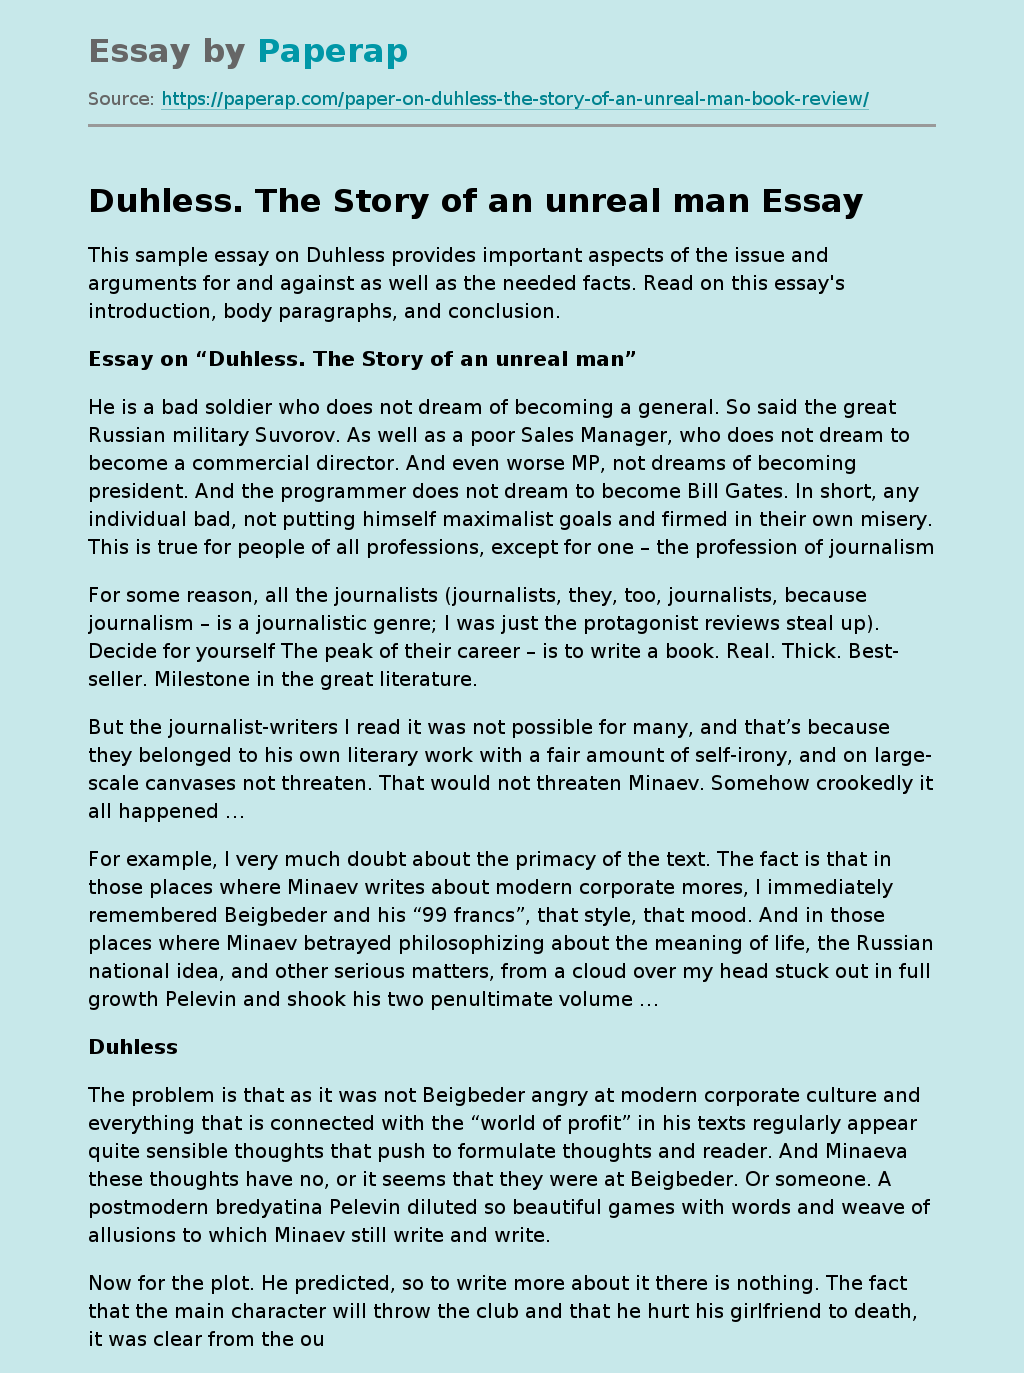 Duhless. The Story of an unreal man